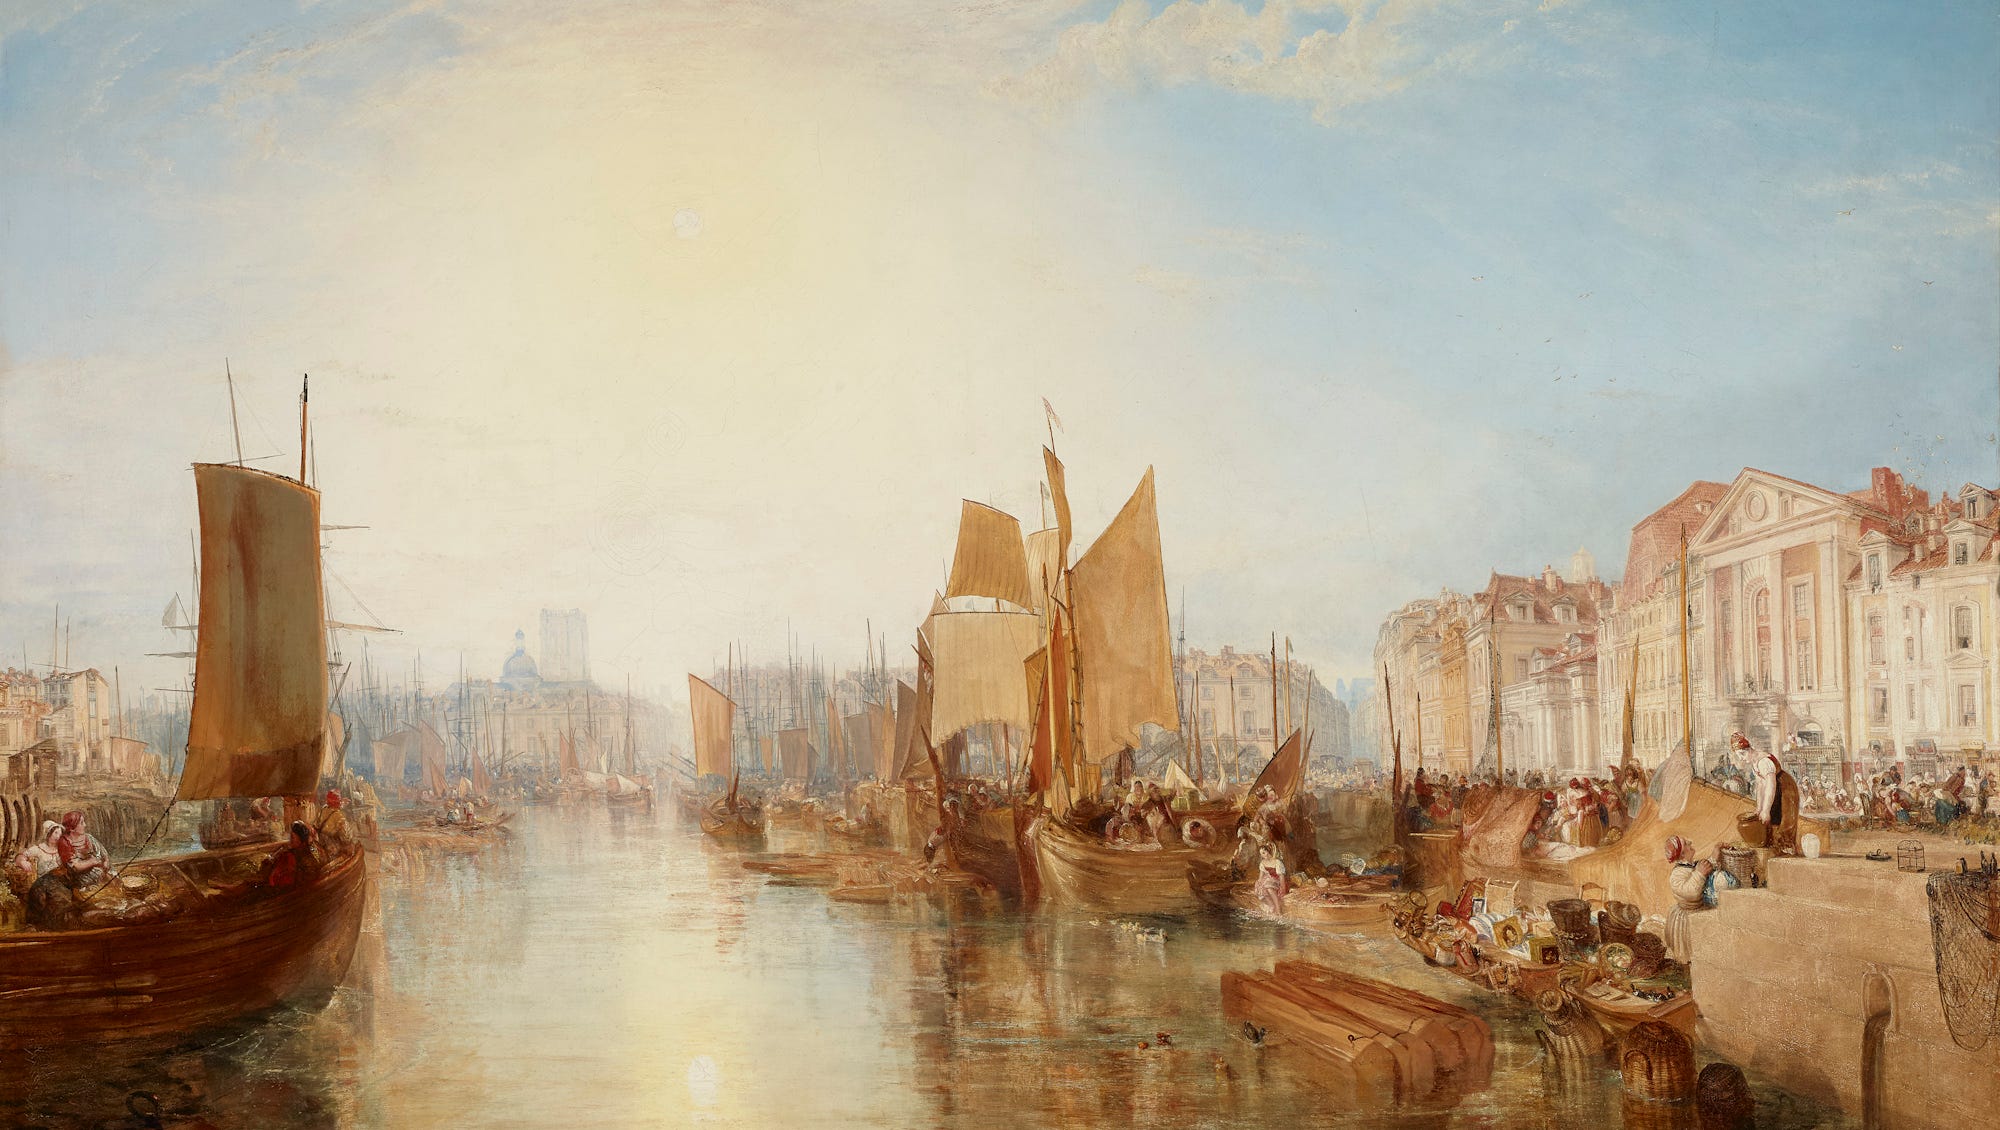 Dazzled by the light: J.M.W. Turner at the Frick